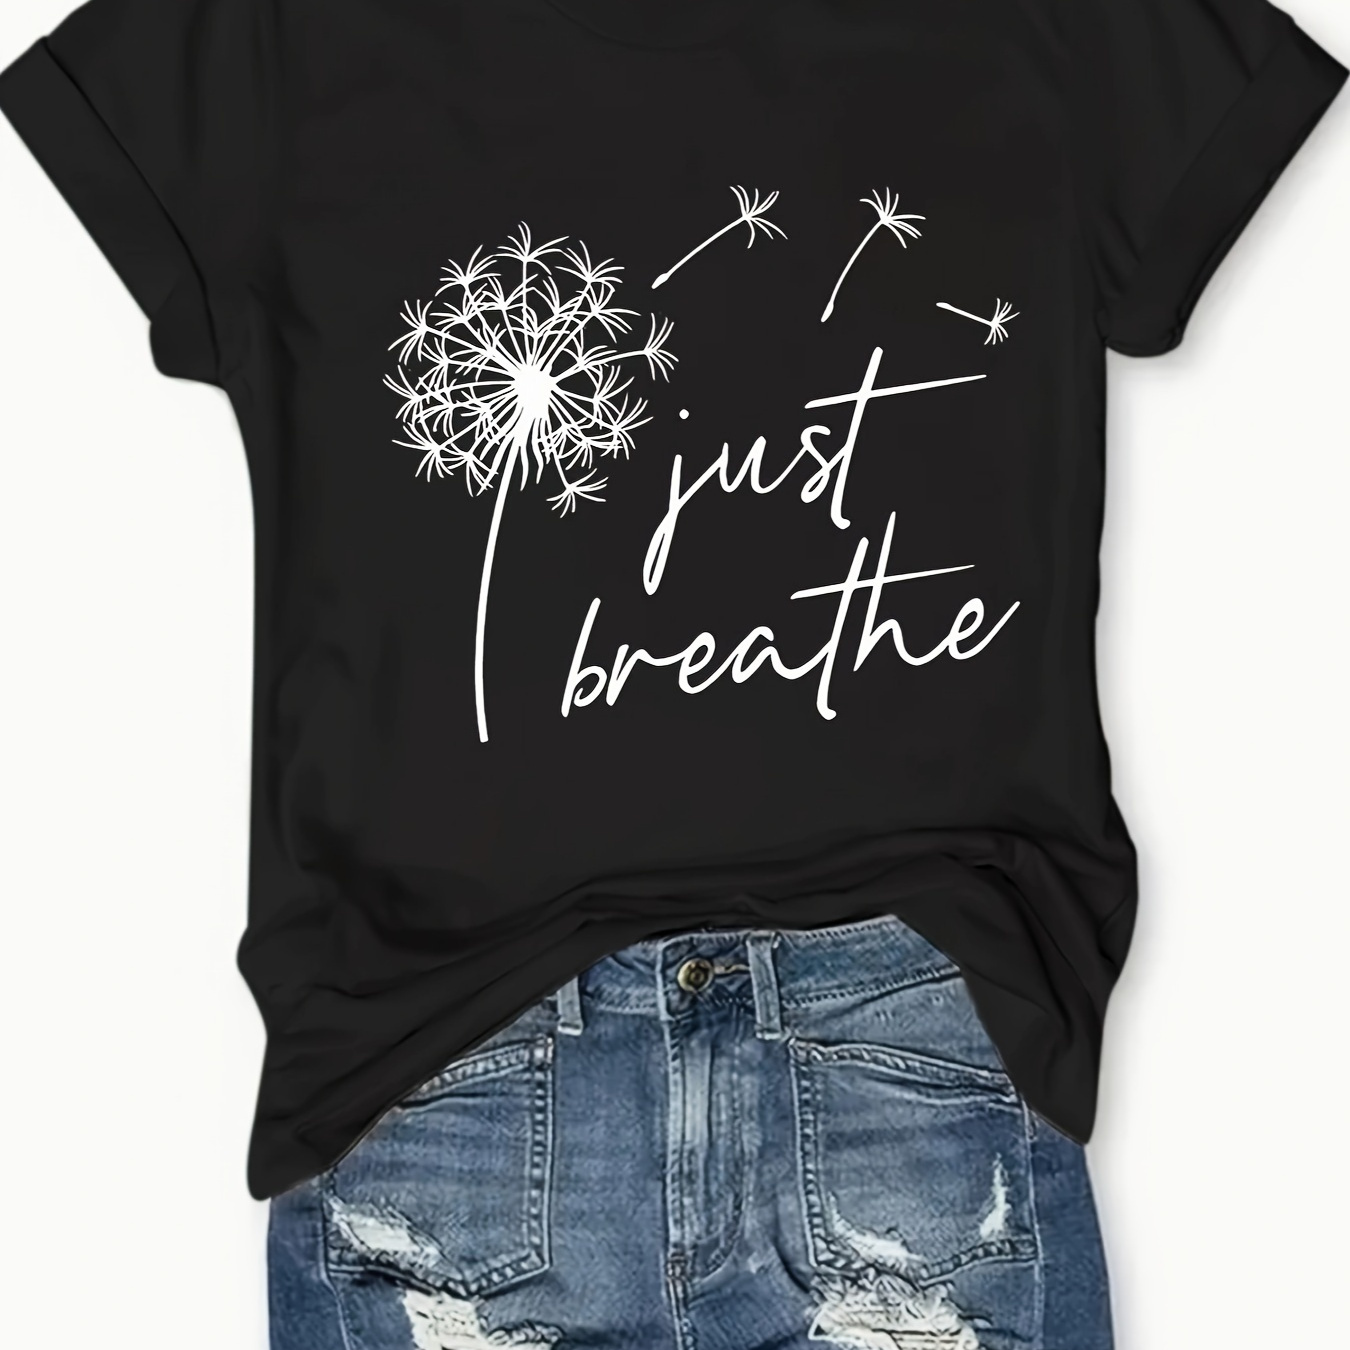 

Just Breathe Print Crew Neck T-shirt, Casual Short Sleeve Top For Spring & Summer, Women's Clothing